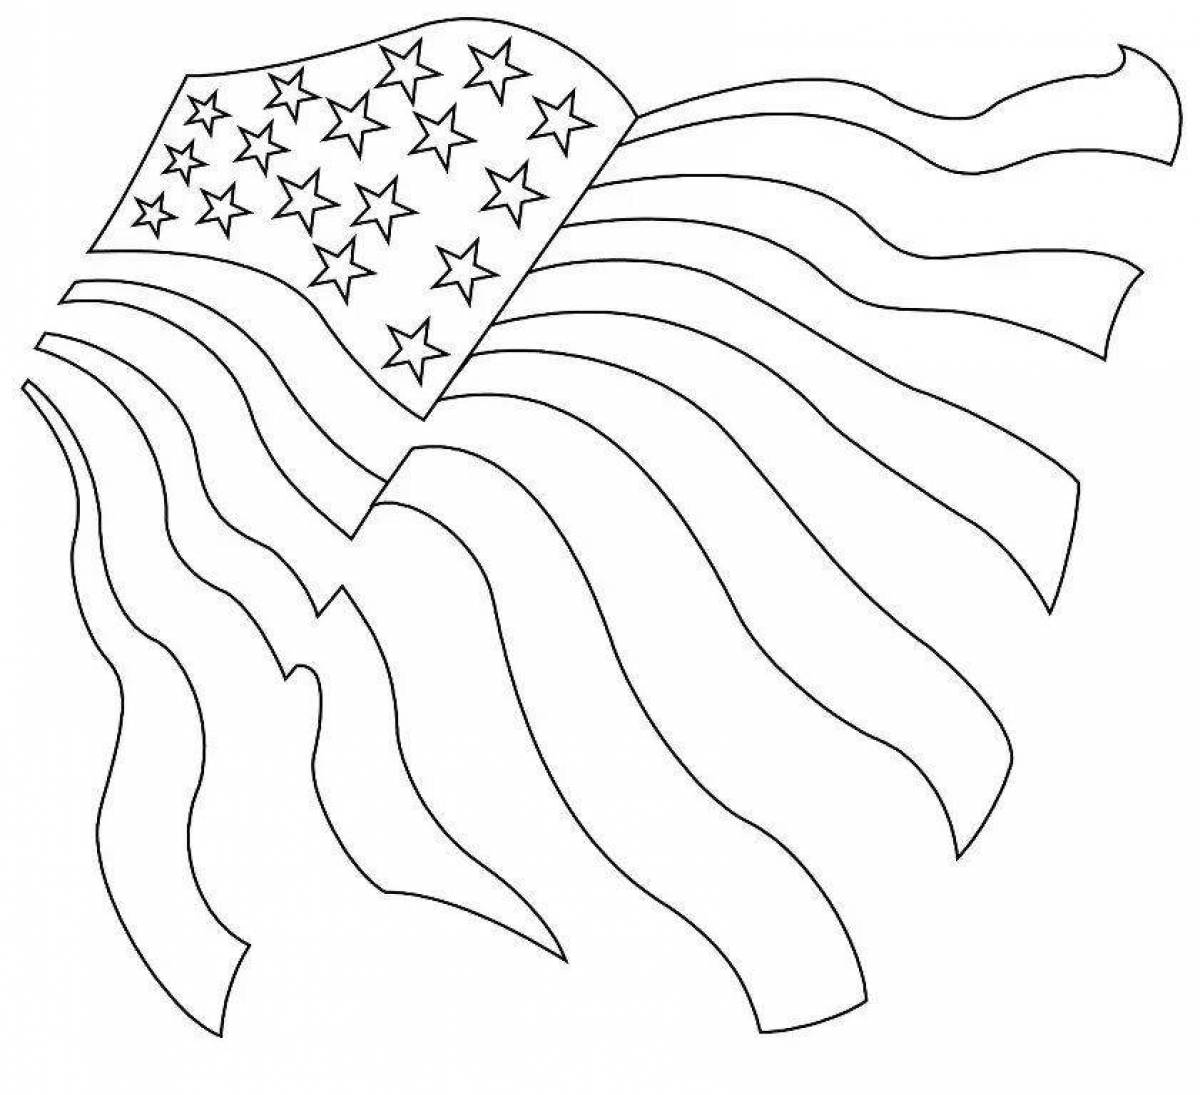 Bright Belarusian flag coloring page